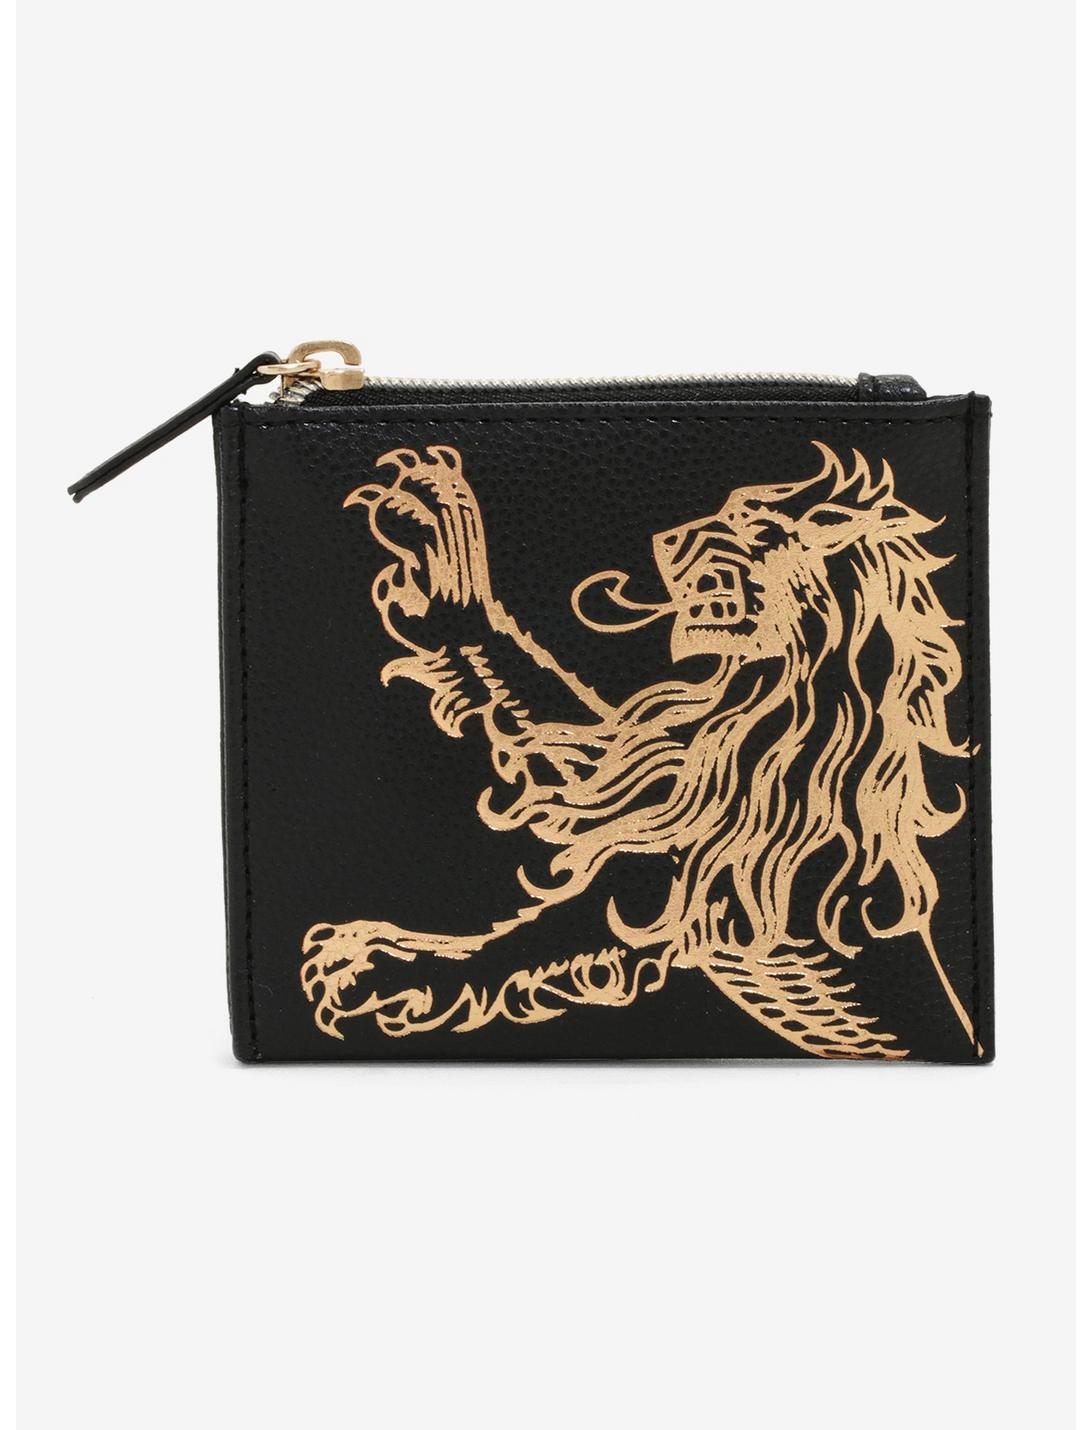 Danielle Nicole Game Of Thrones House Lannister Coin Purse - BoxLunch Exclusive, , hi-res